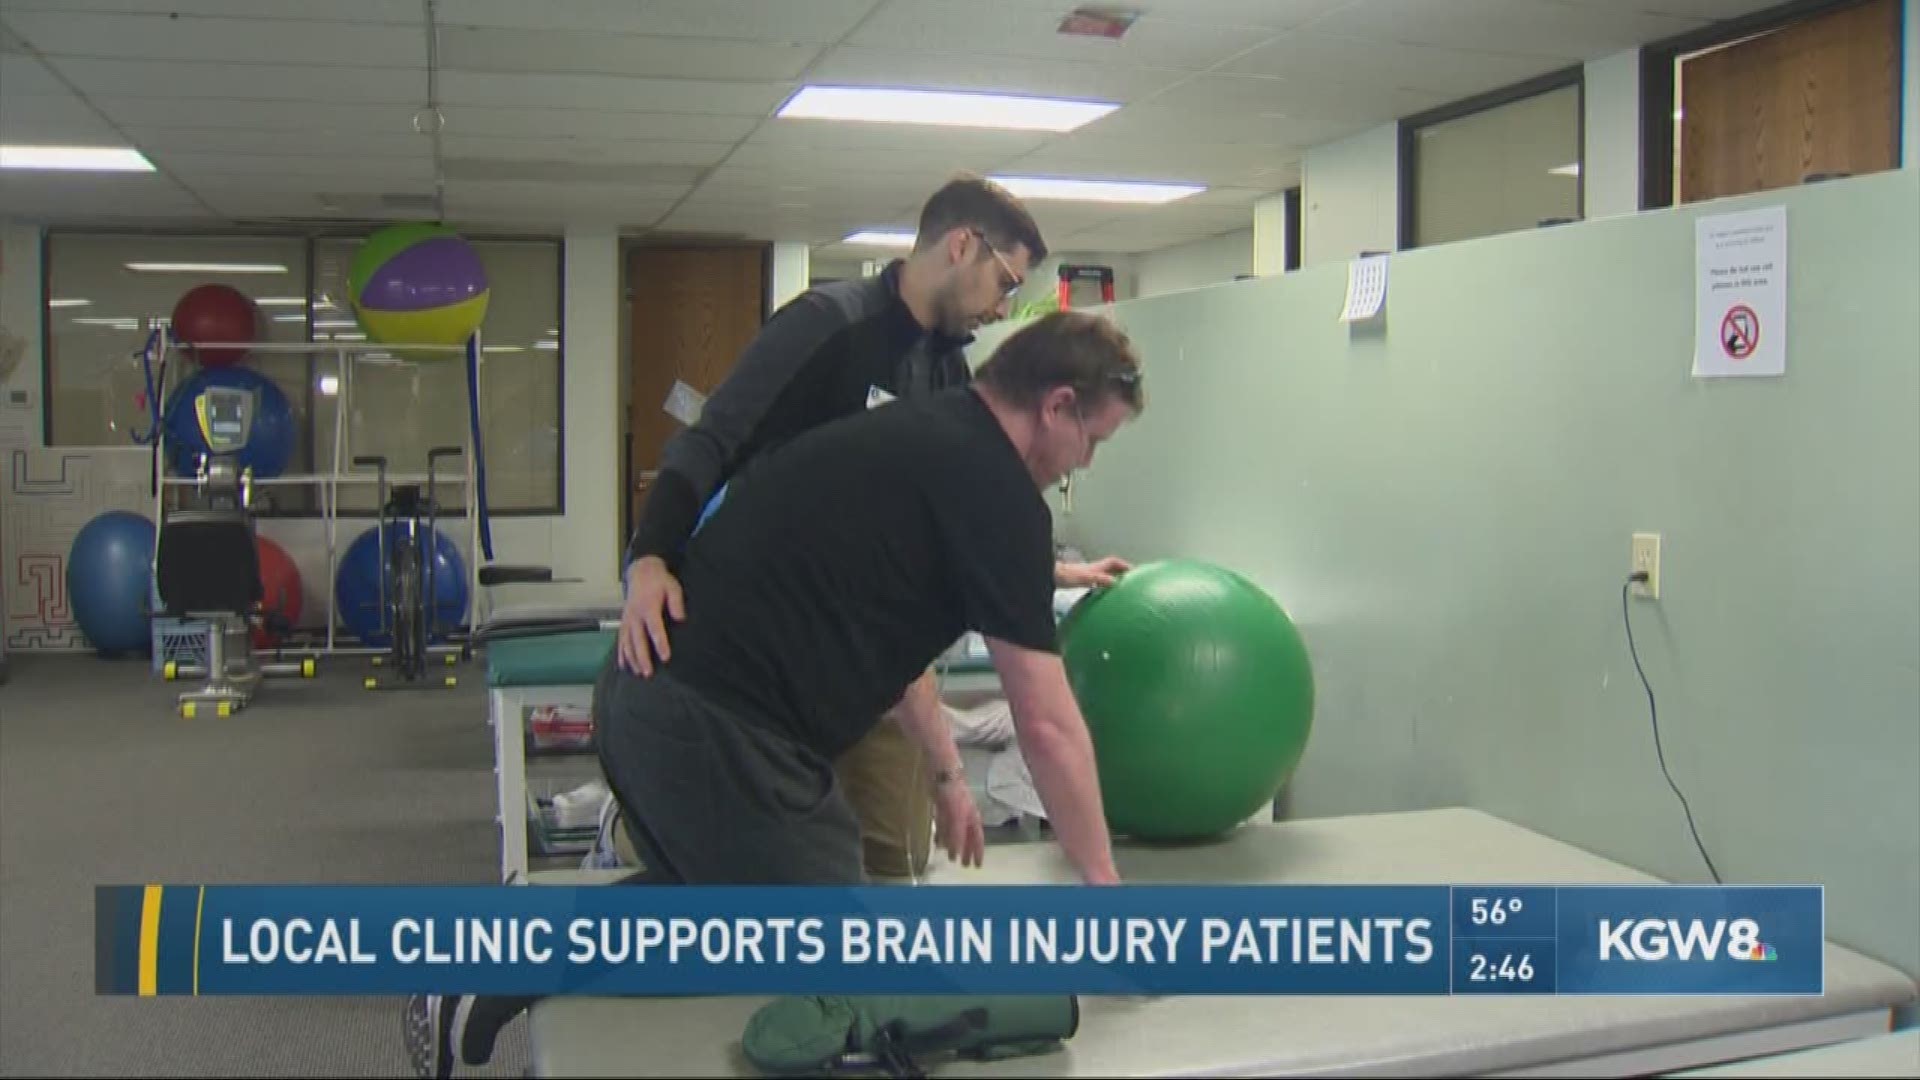 Local clinic supports brain injury patients